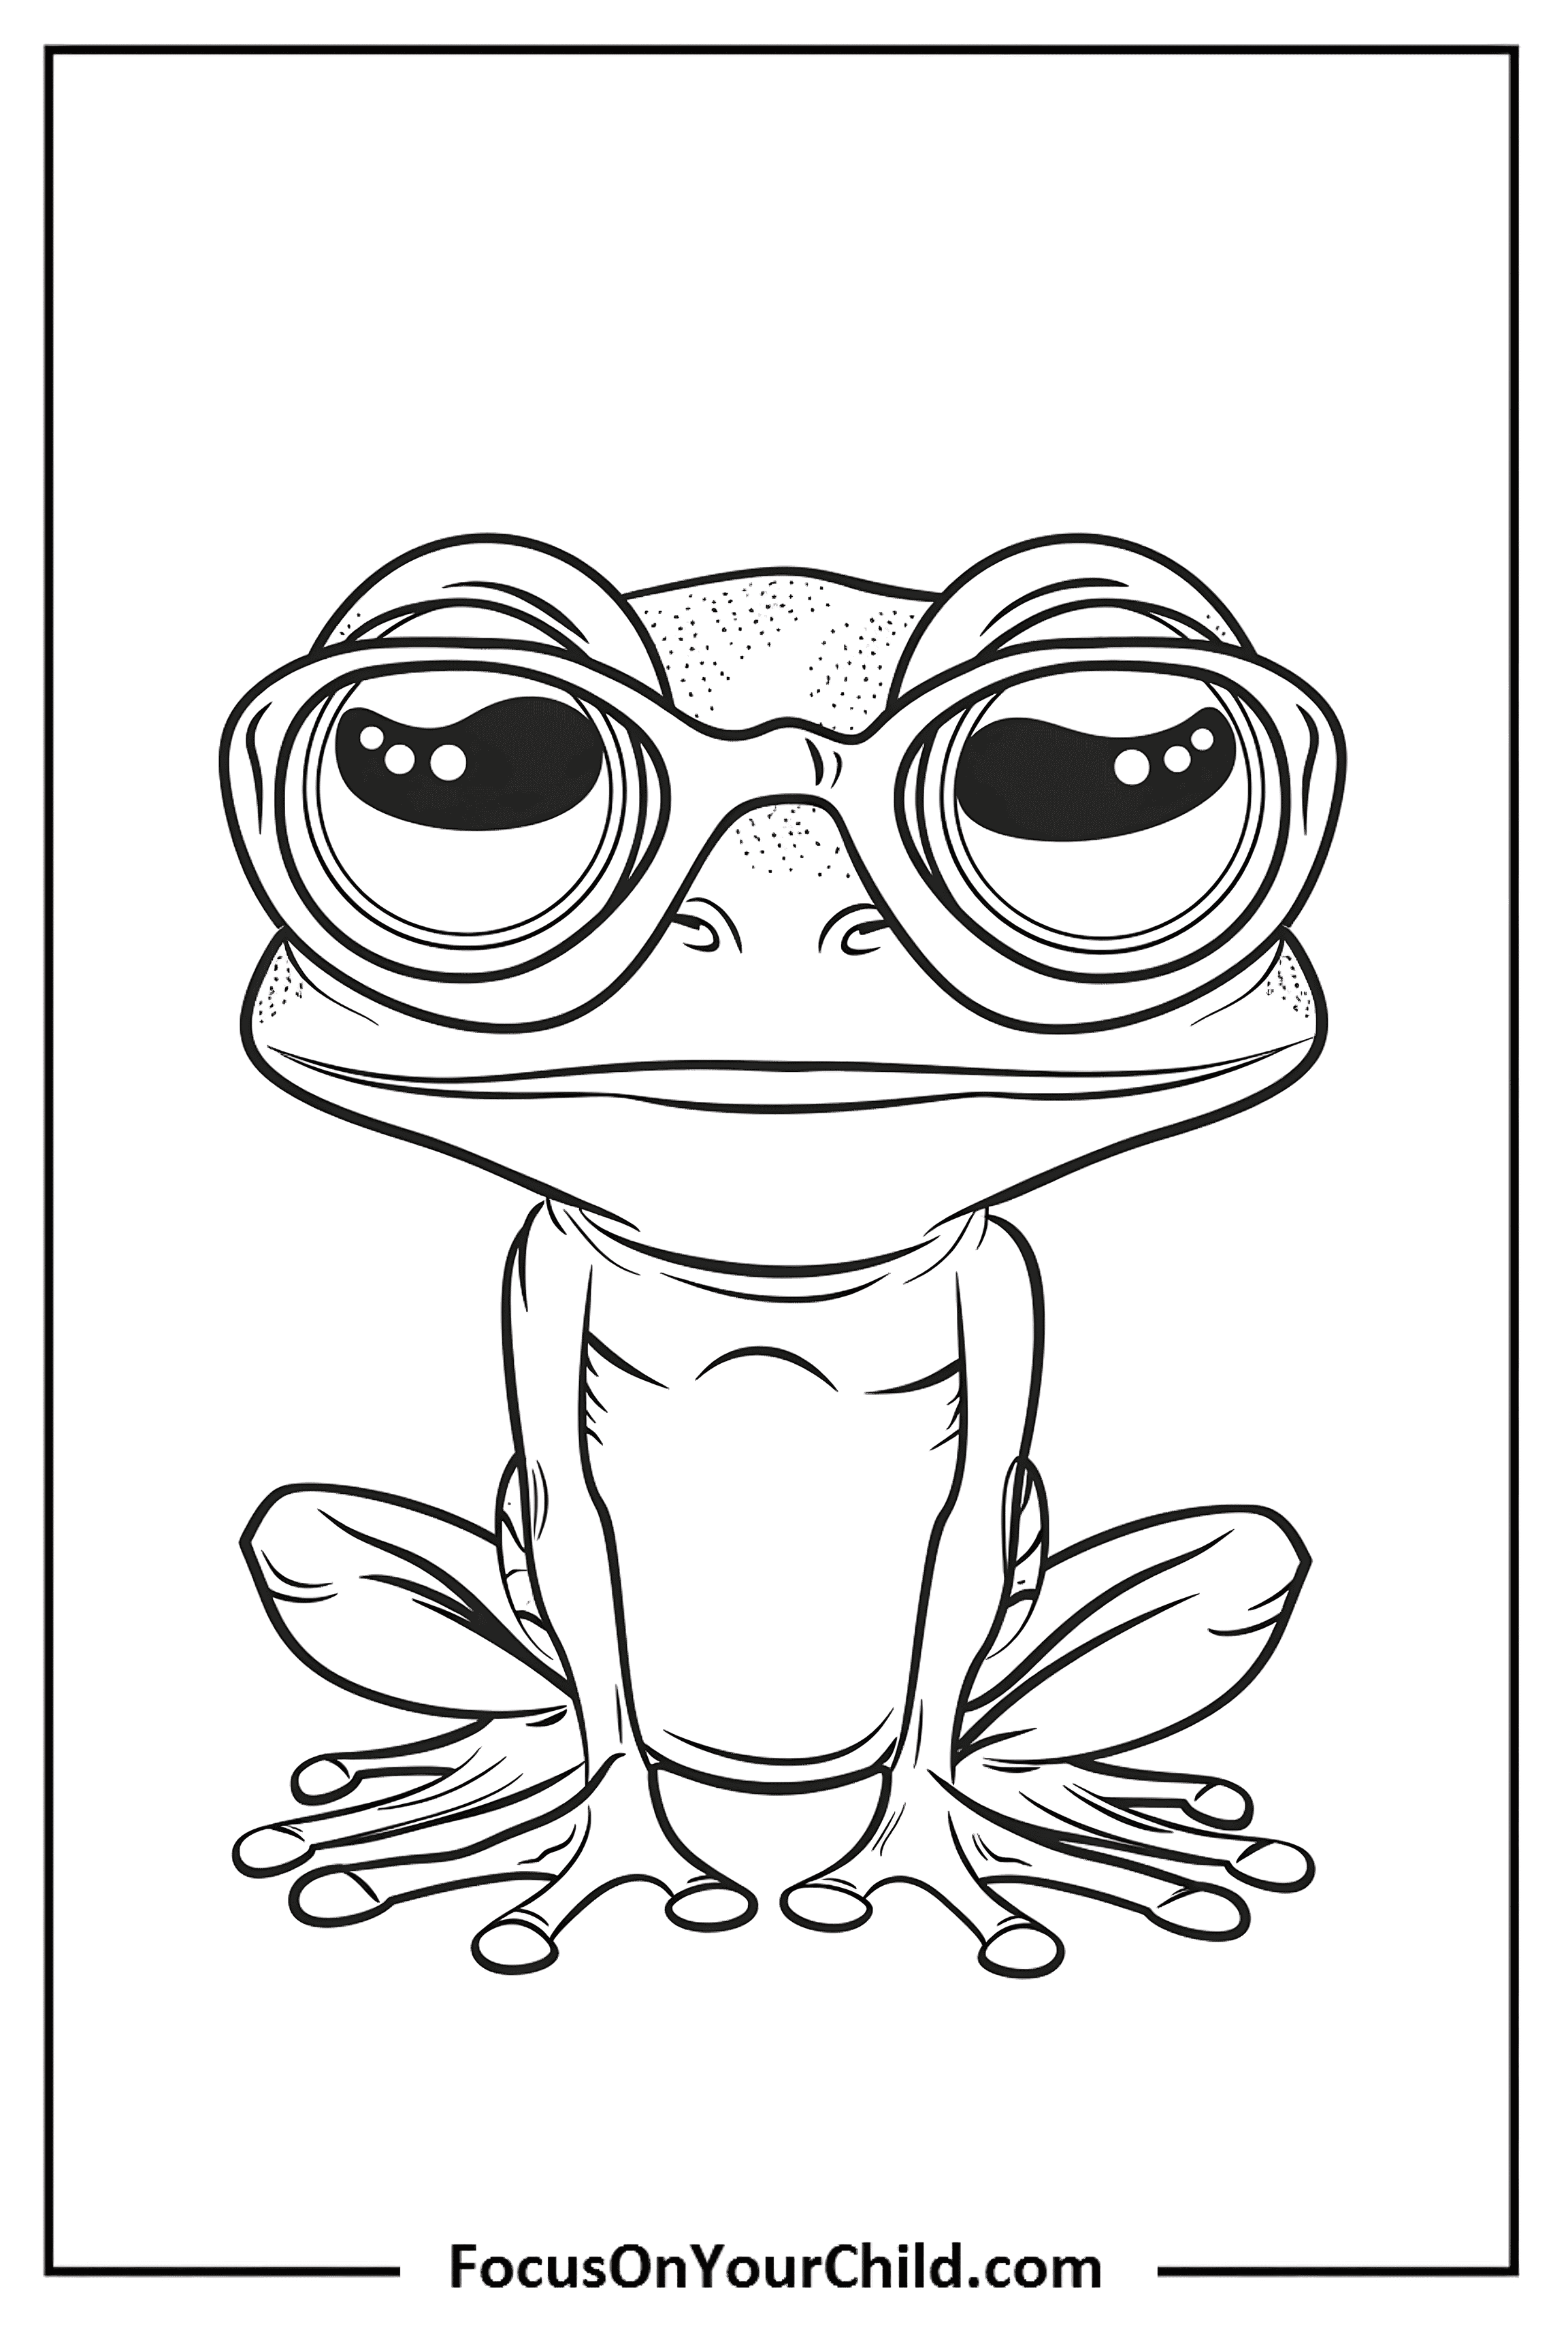 Whimsical black-and-white cartoon drawing of a frog with oversized eyes.